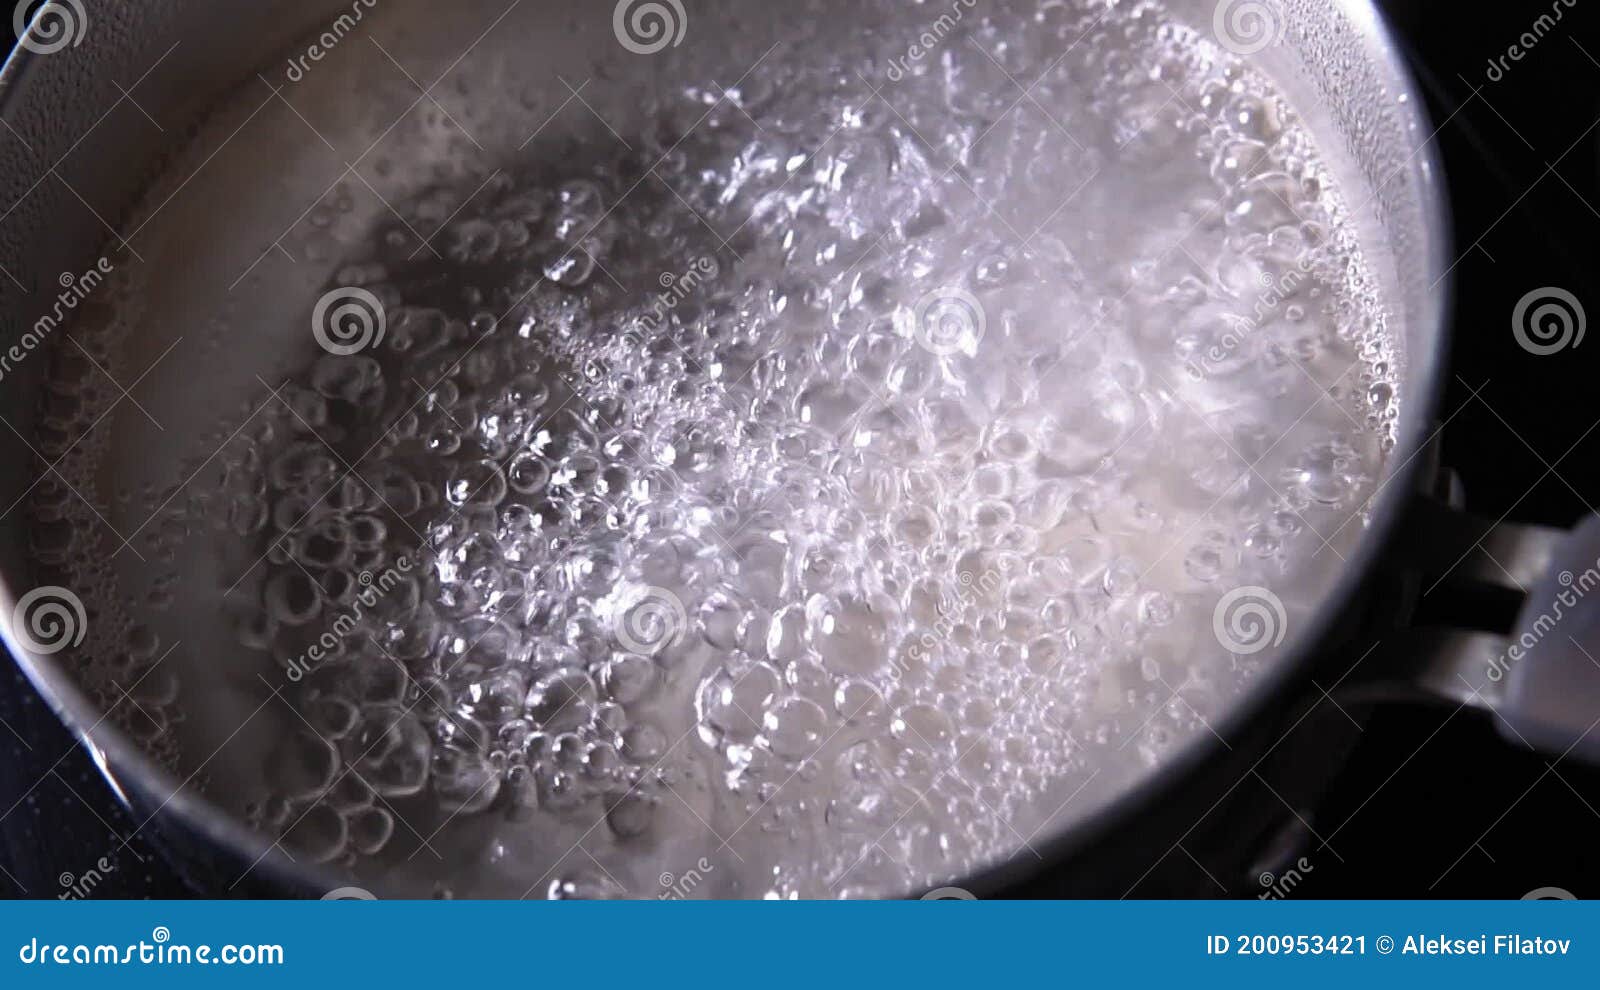 How to boil water without bubbles